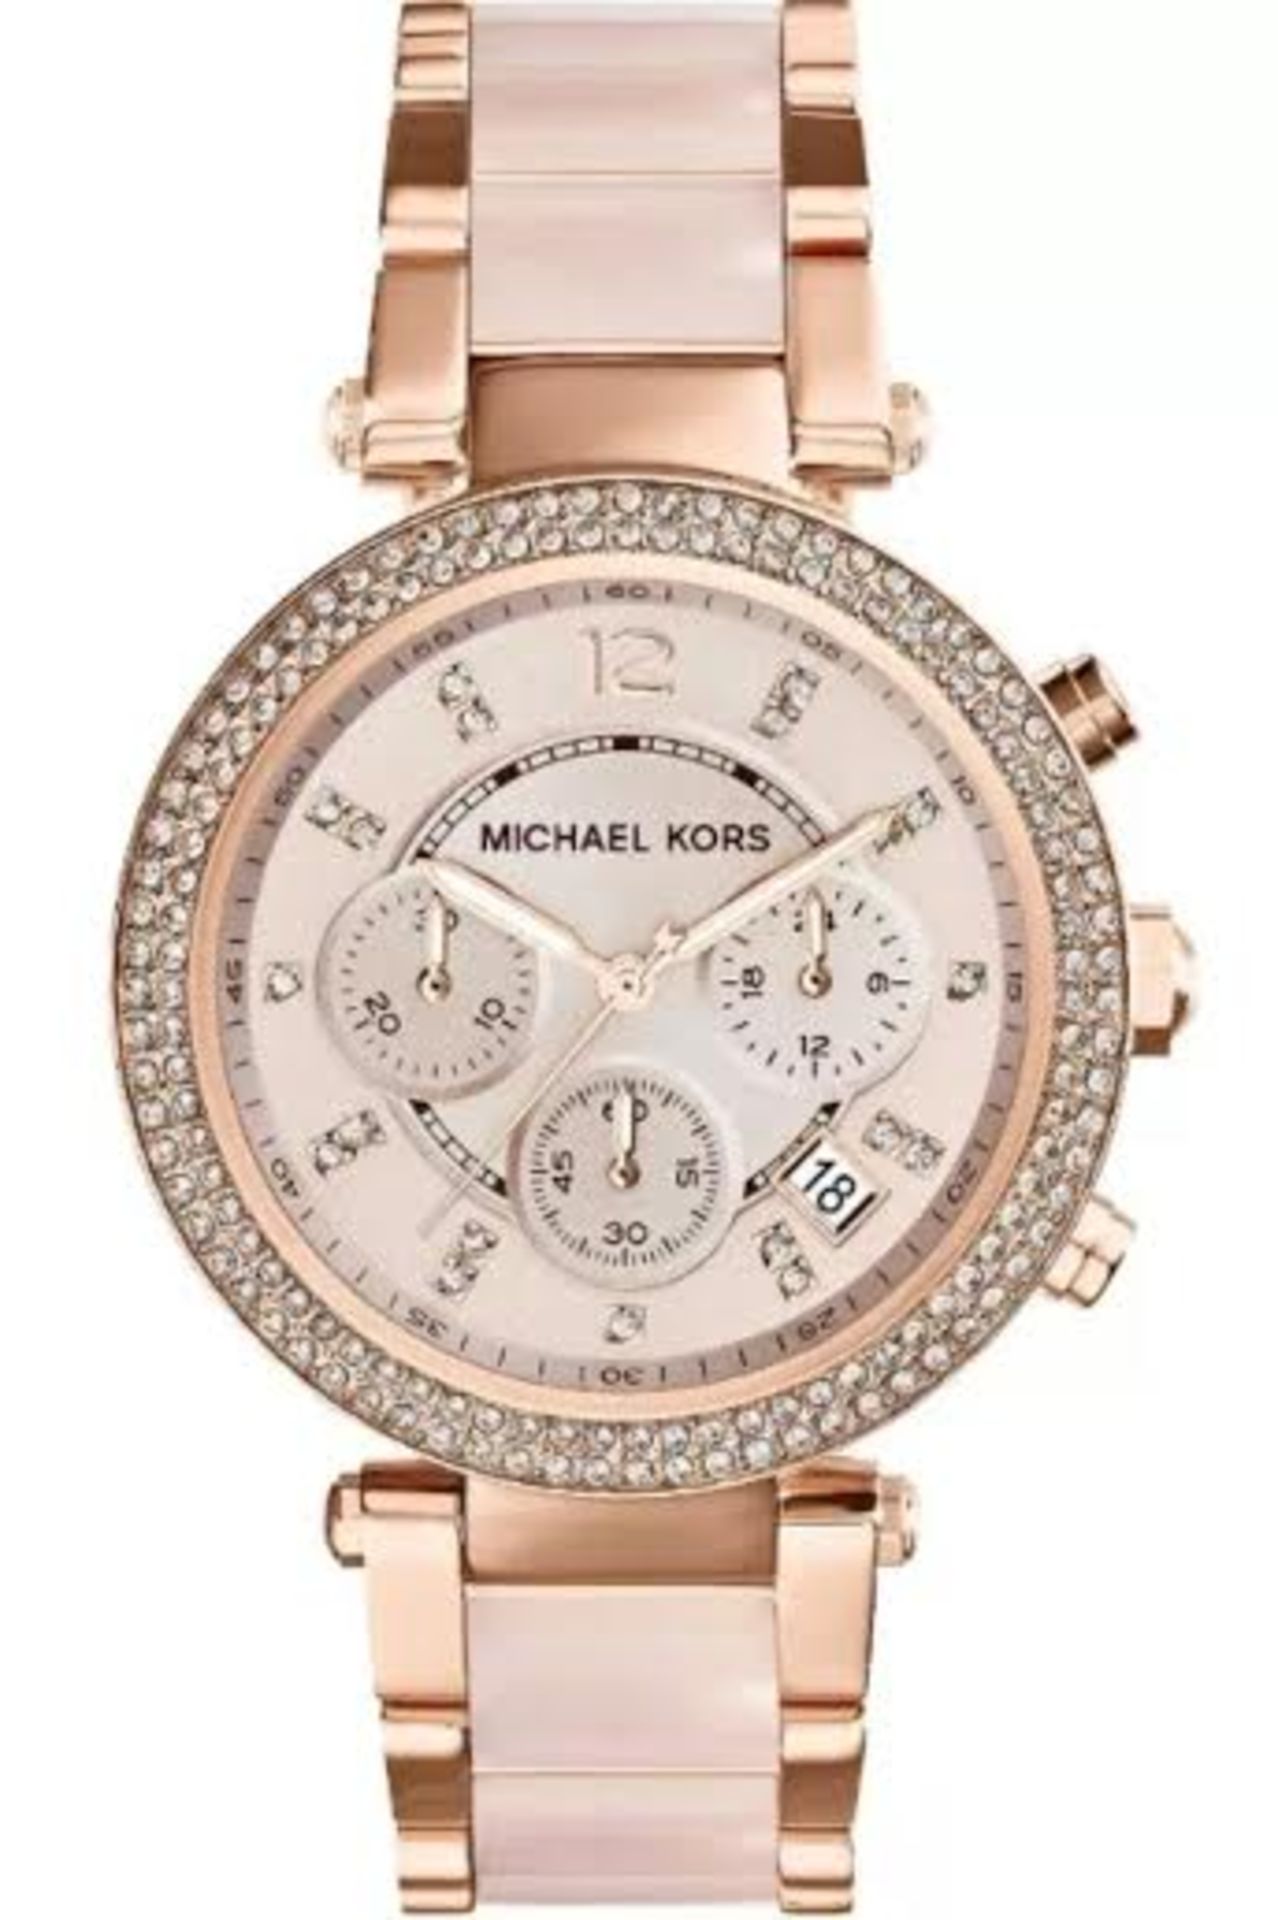 BRAND NEW LADIES MICHAEL KORS WATCH, MK5896, COMPLETE WITH ORIGINAL BOX AND MANUAL - RRP £399